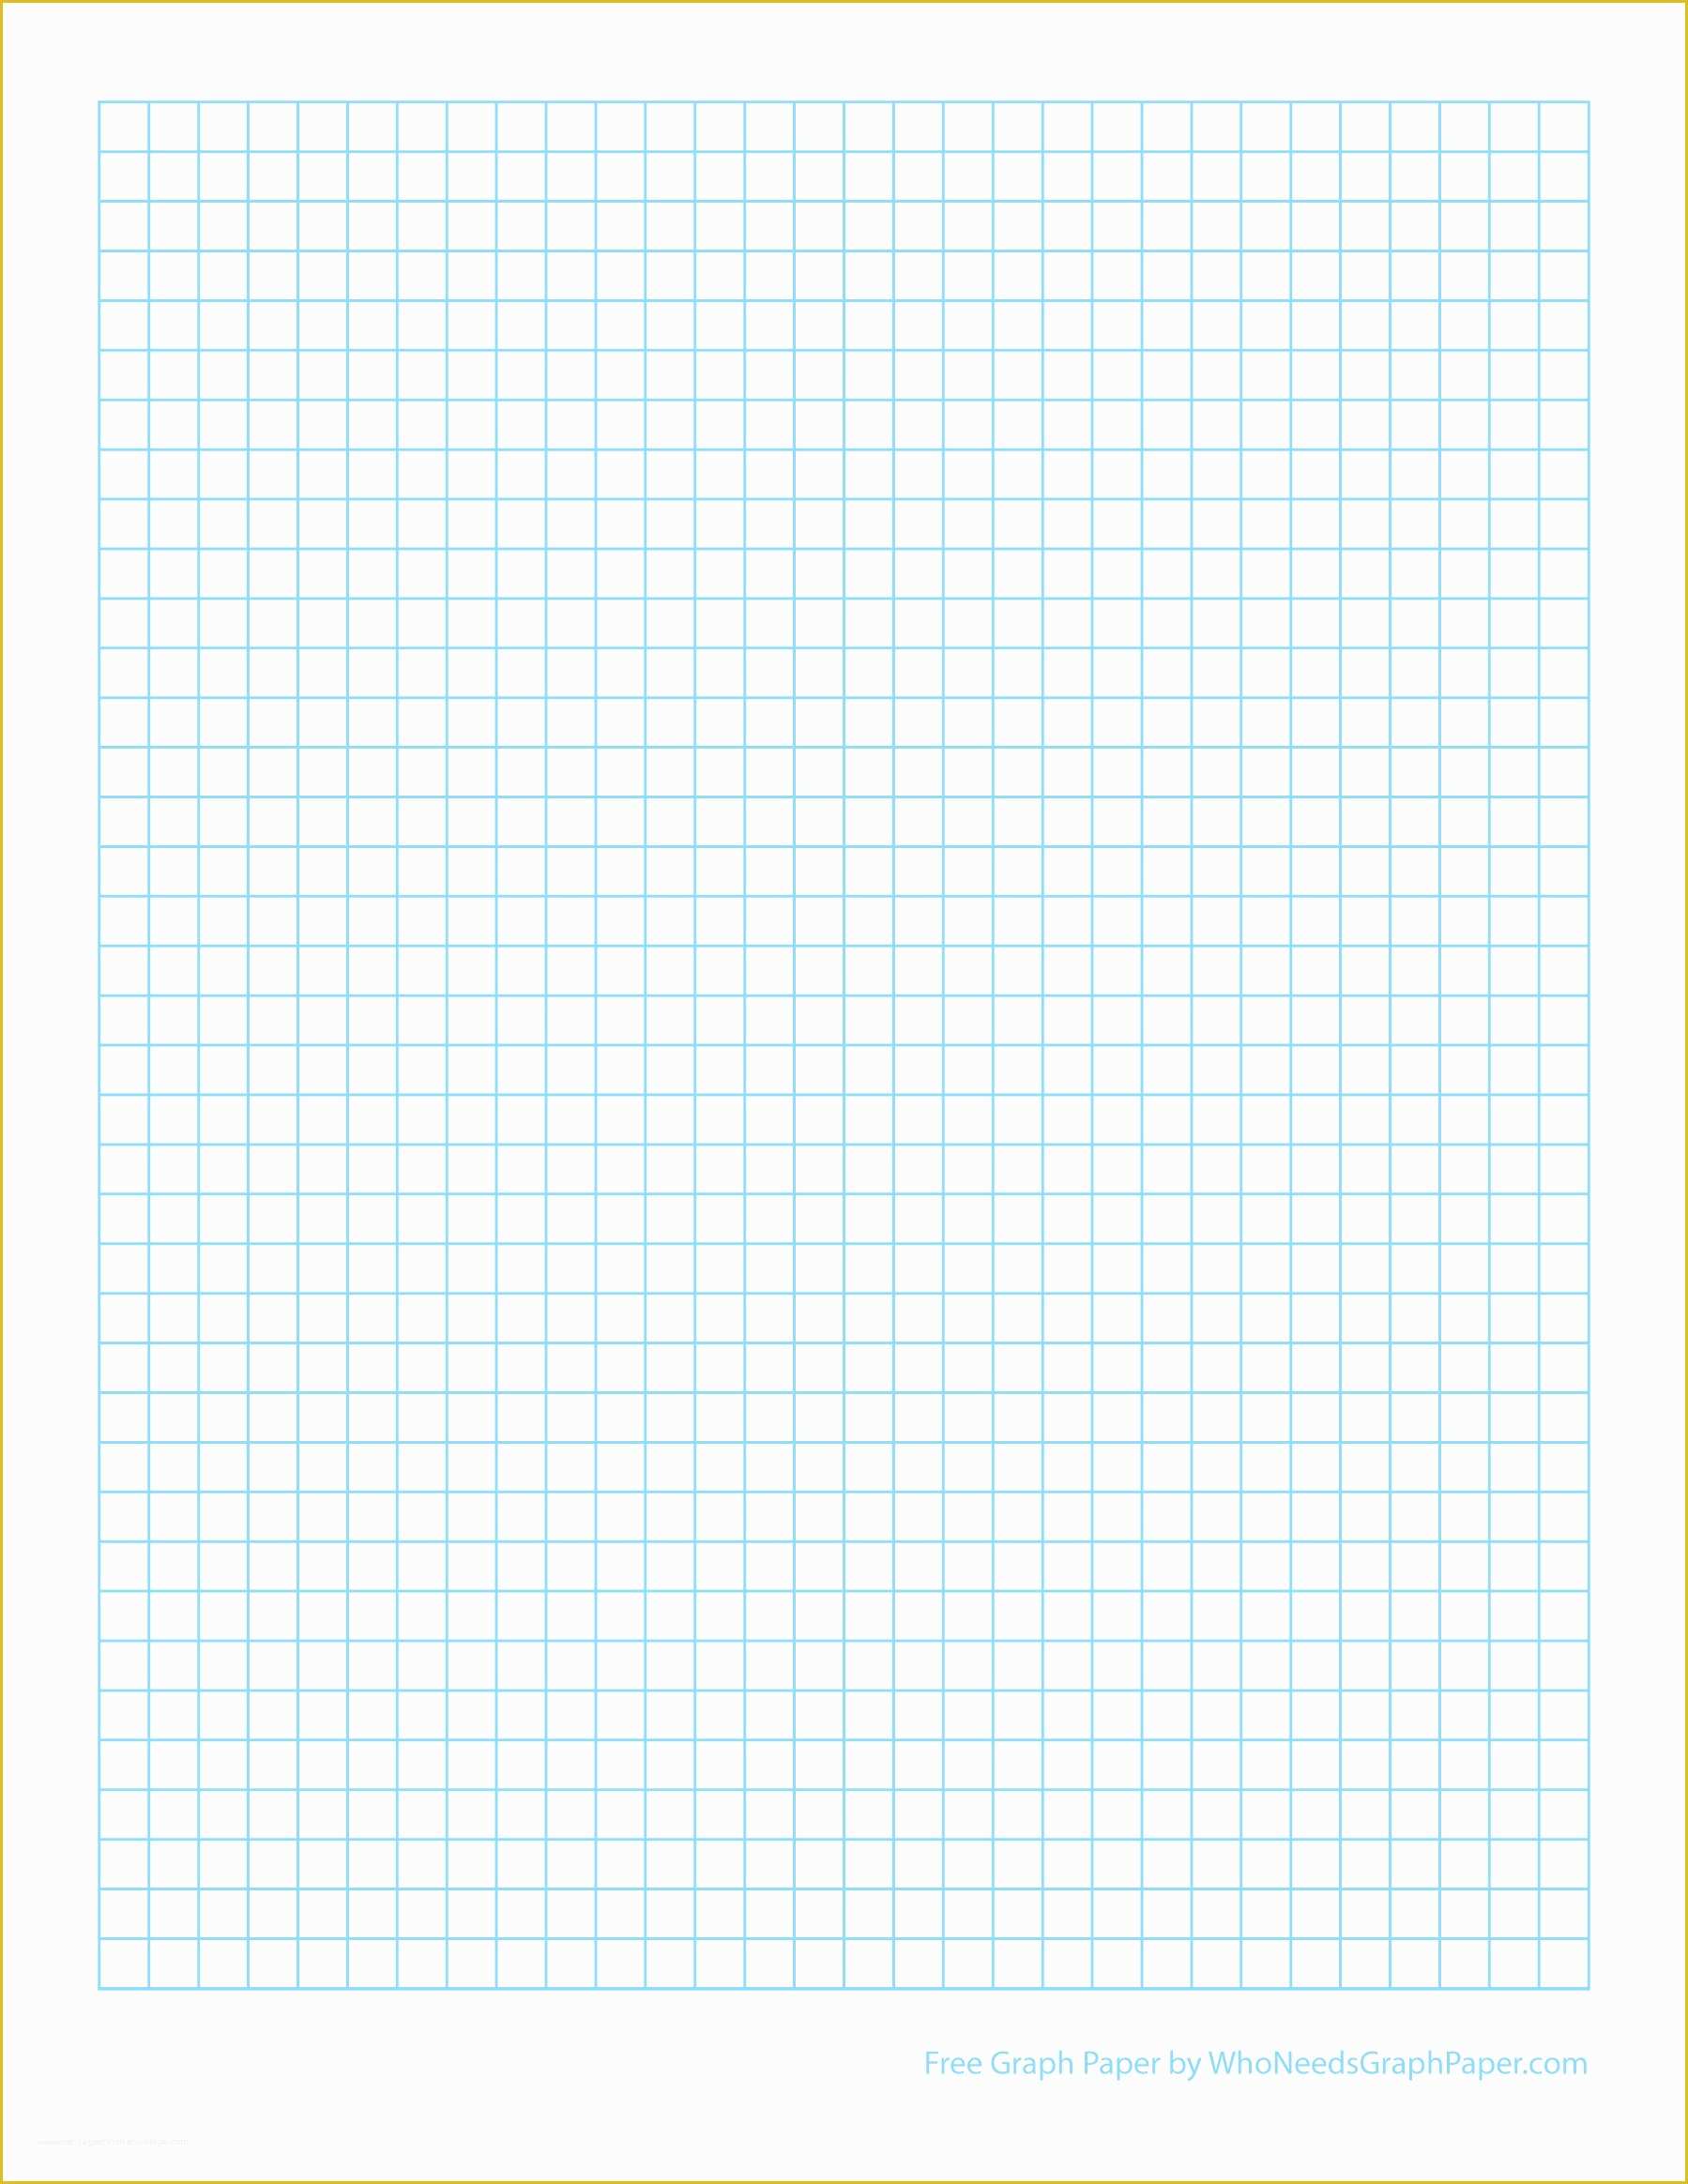 Free Graph Templates Of Free Printable Grid Paper